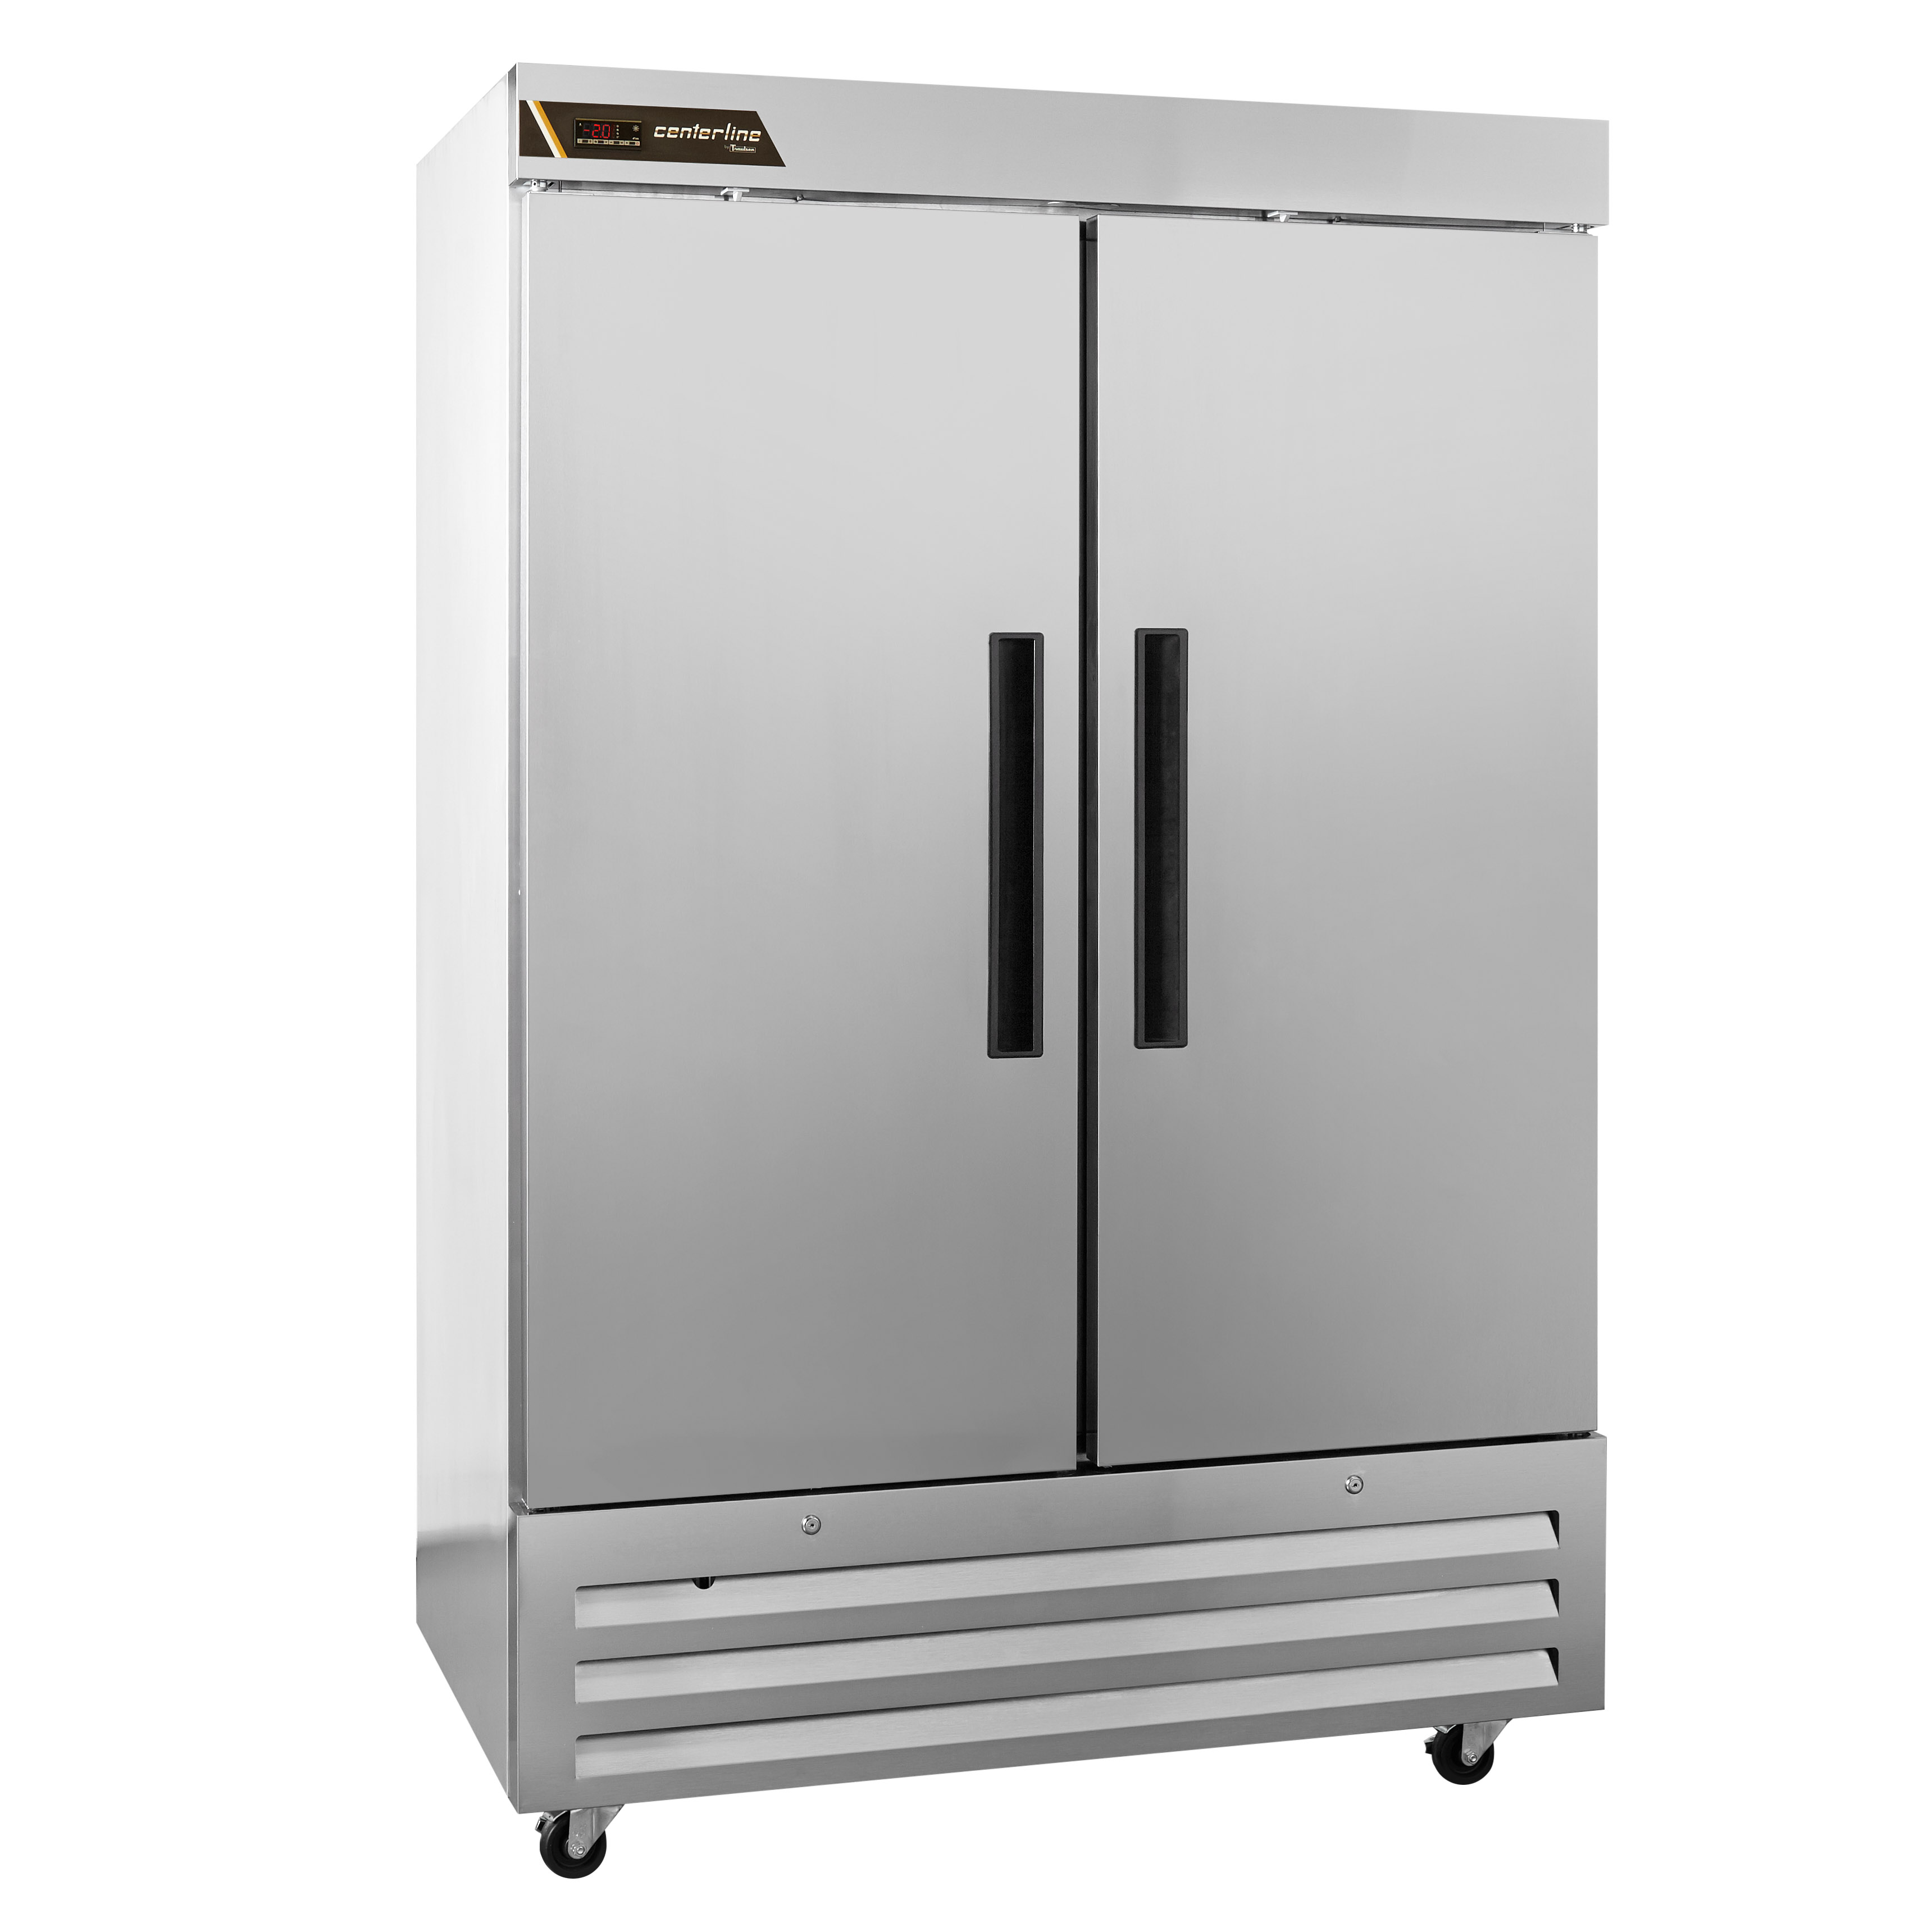 Traulsen CLBM-49F-HS-RR Two Section Solid Door Reach-In Freezer, 43.88 cu. ft.